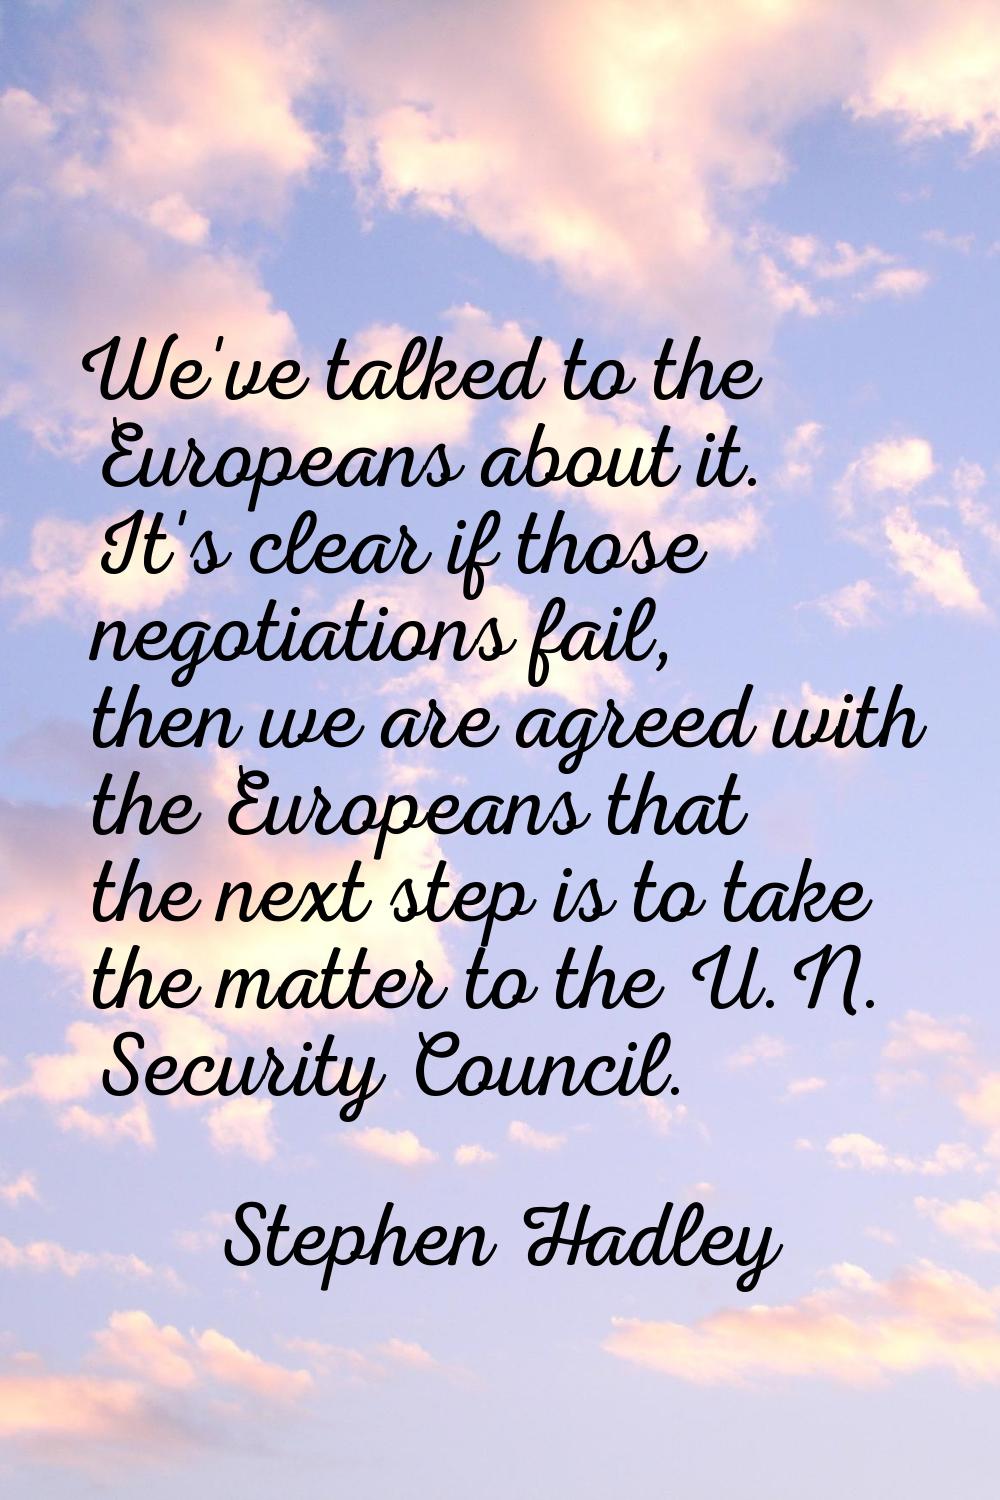 We've talked to the Europeans about it. It's clear if those negotiations fail, then we are agreed w